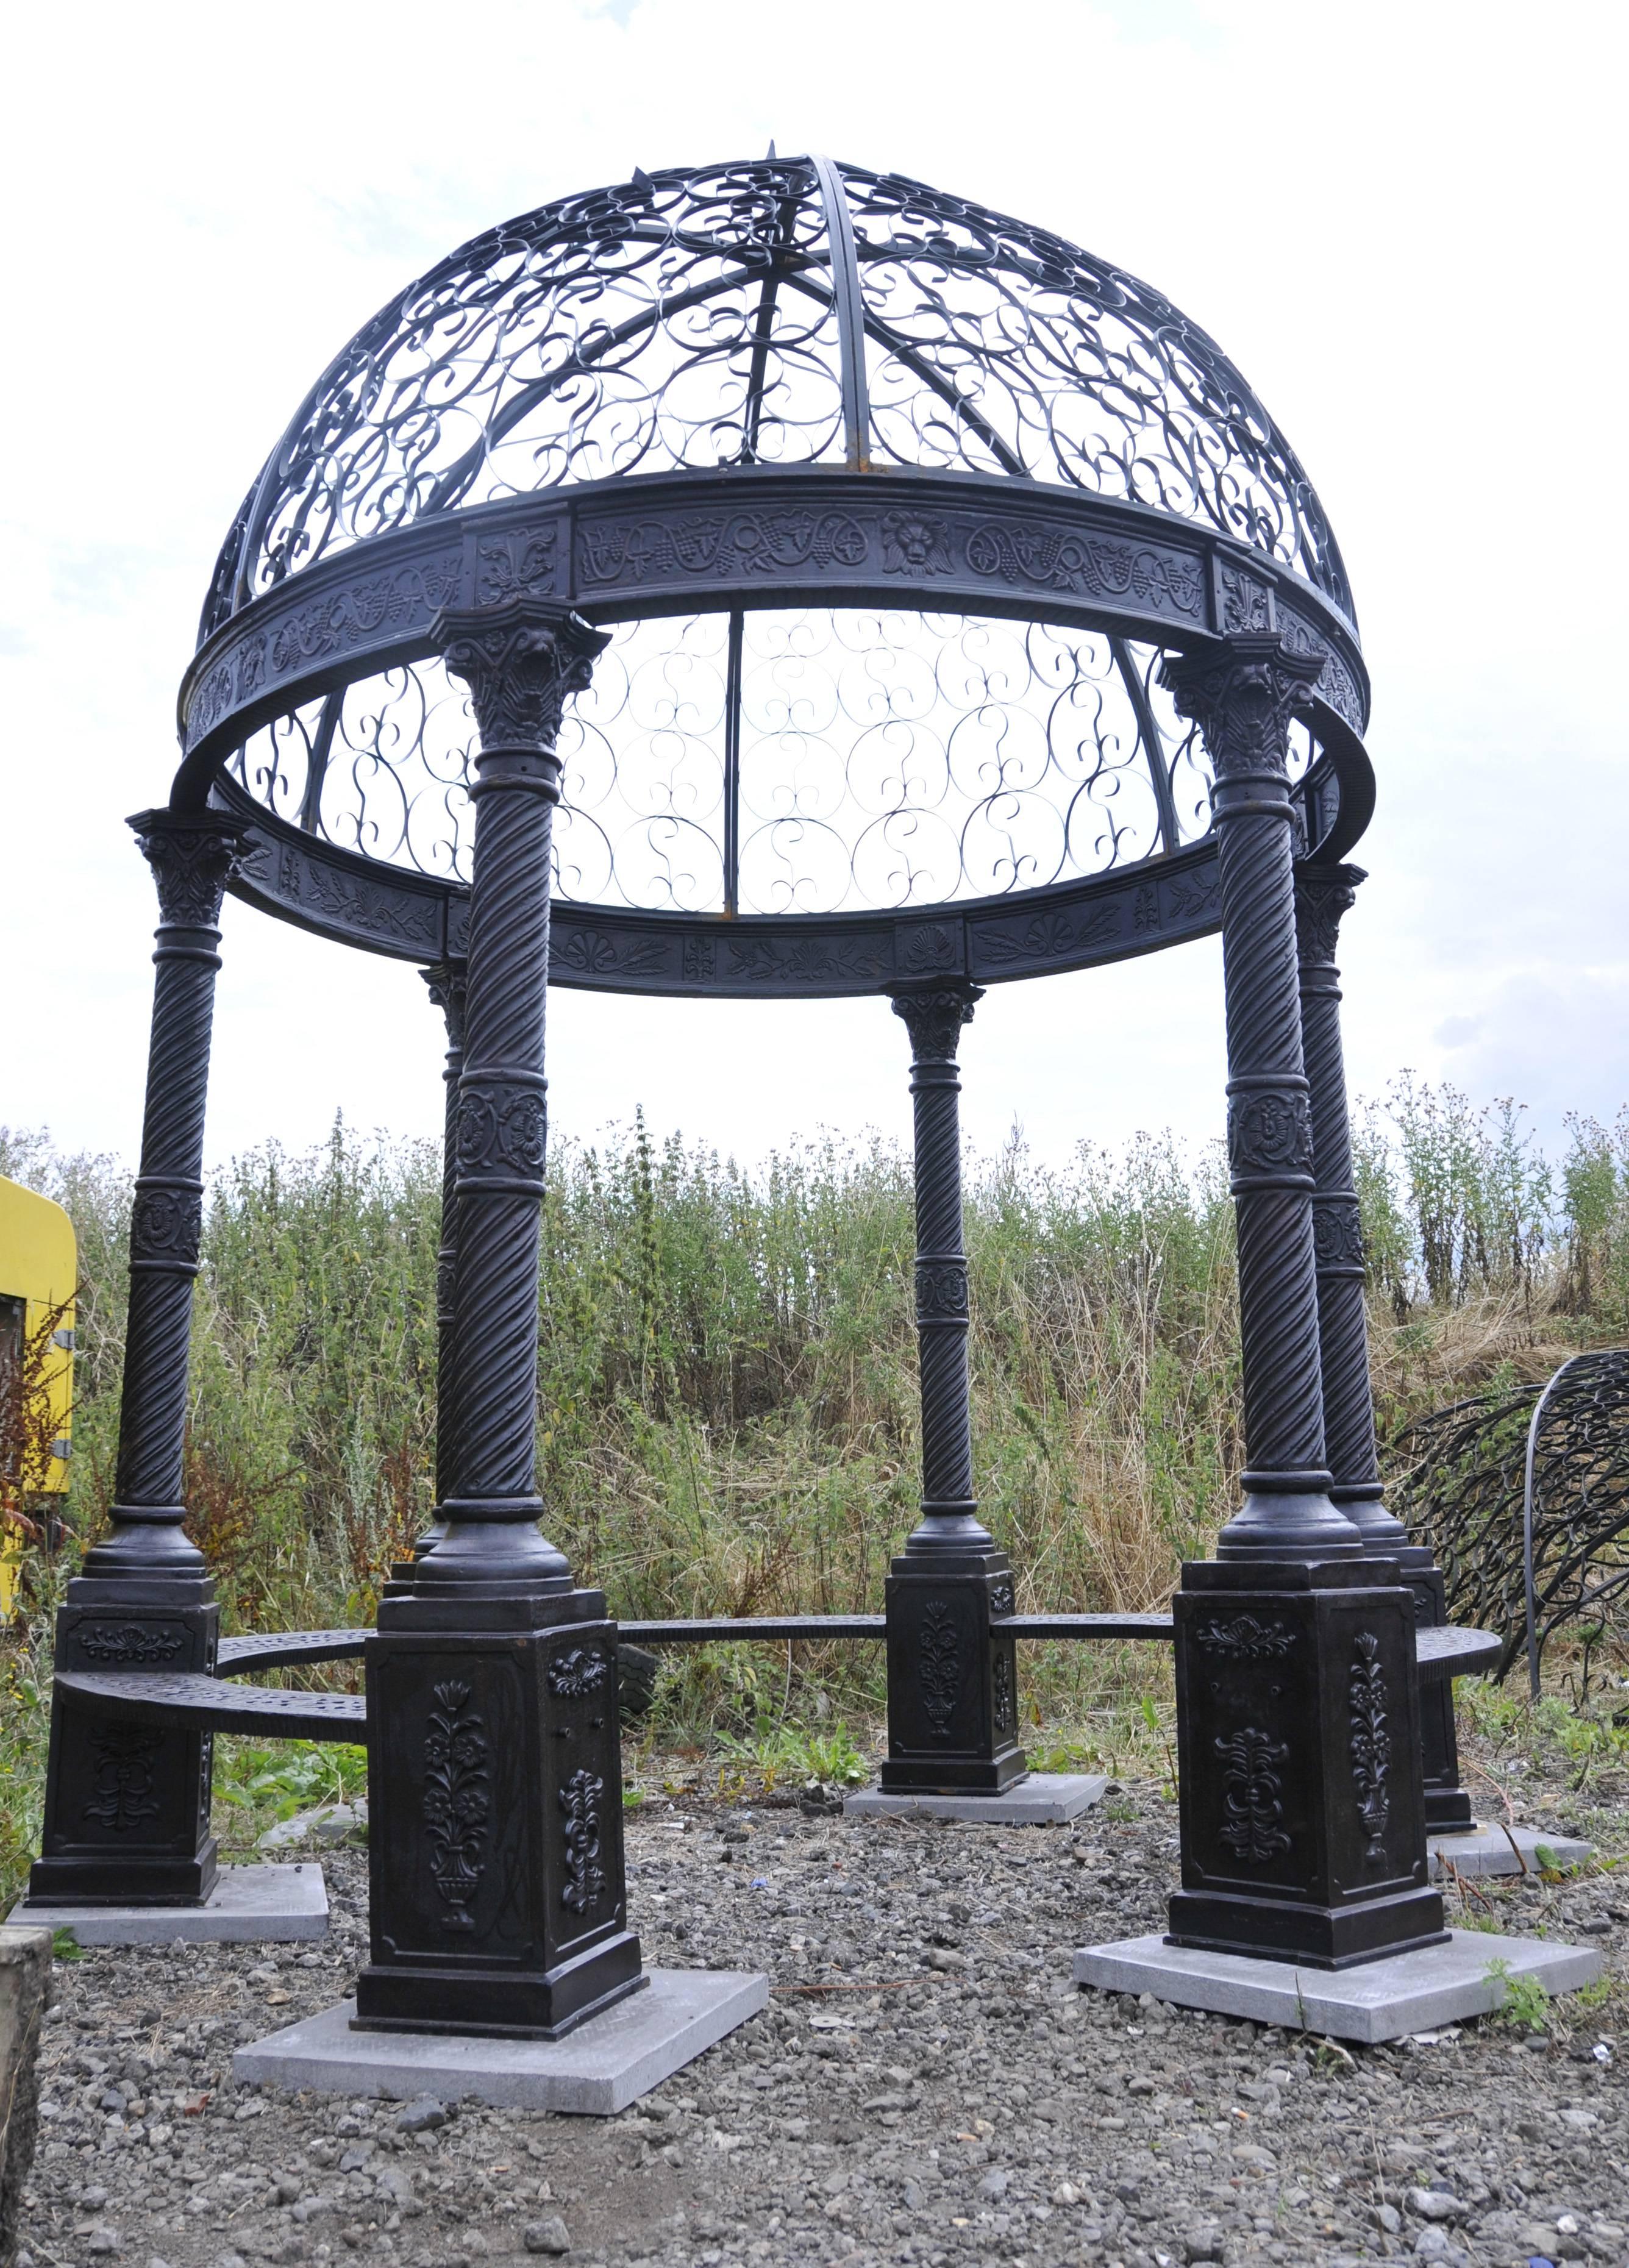 Massive cast iron Victorian style gazebo of an architectural importance.
Stands in at nearly fifteen feet tall so very big.
Once set up over months and years foliage and vines will grow over the canopy to give extra shade and to look incredibly